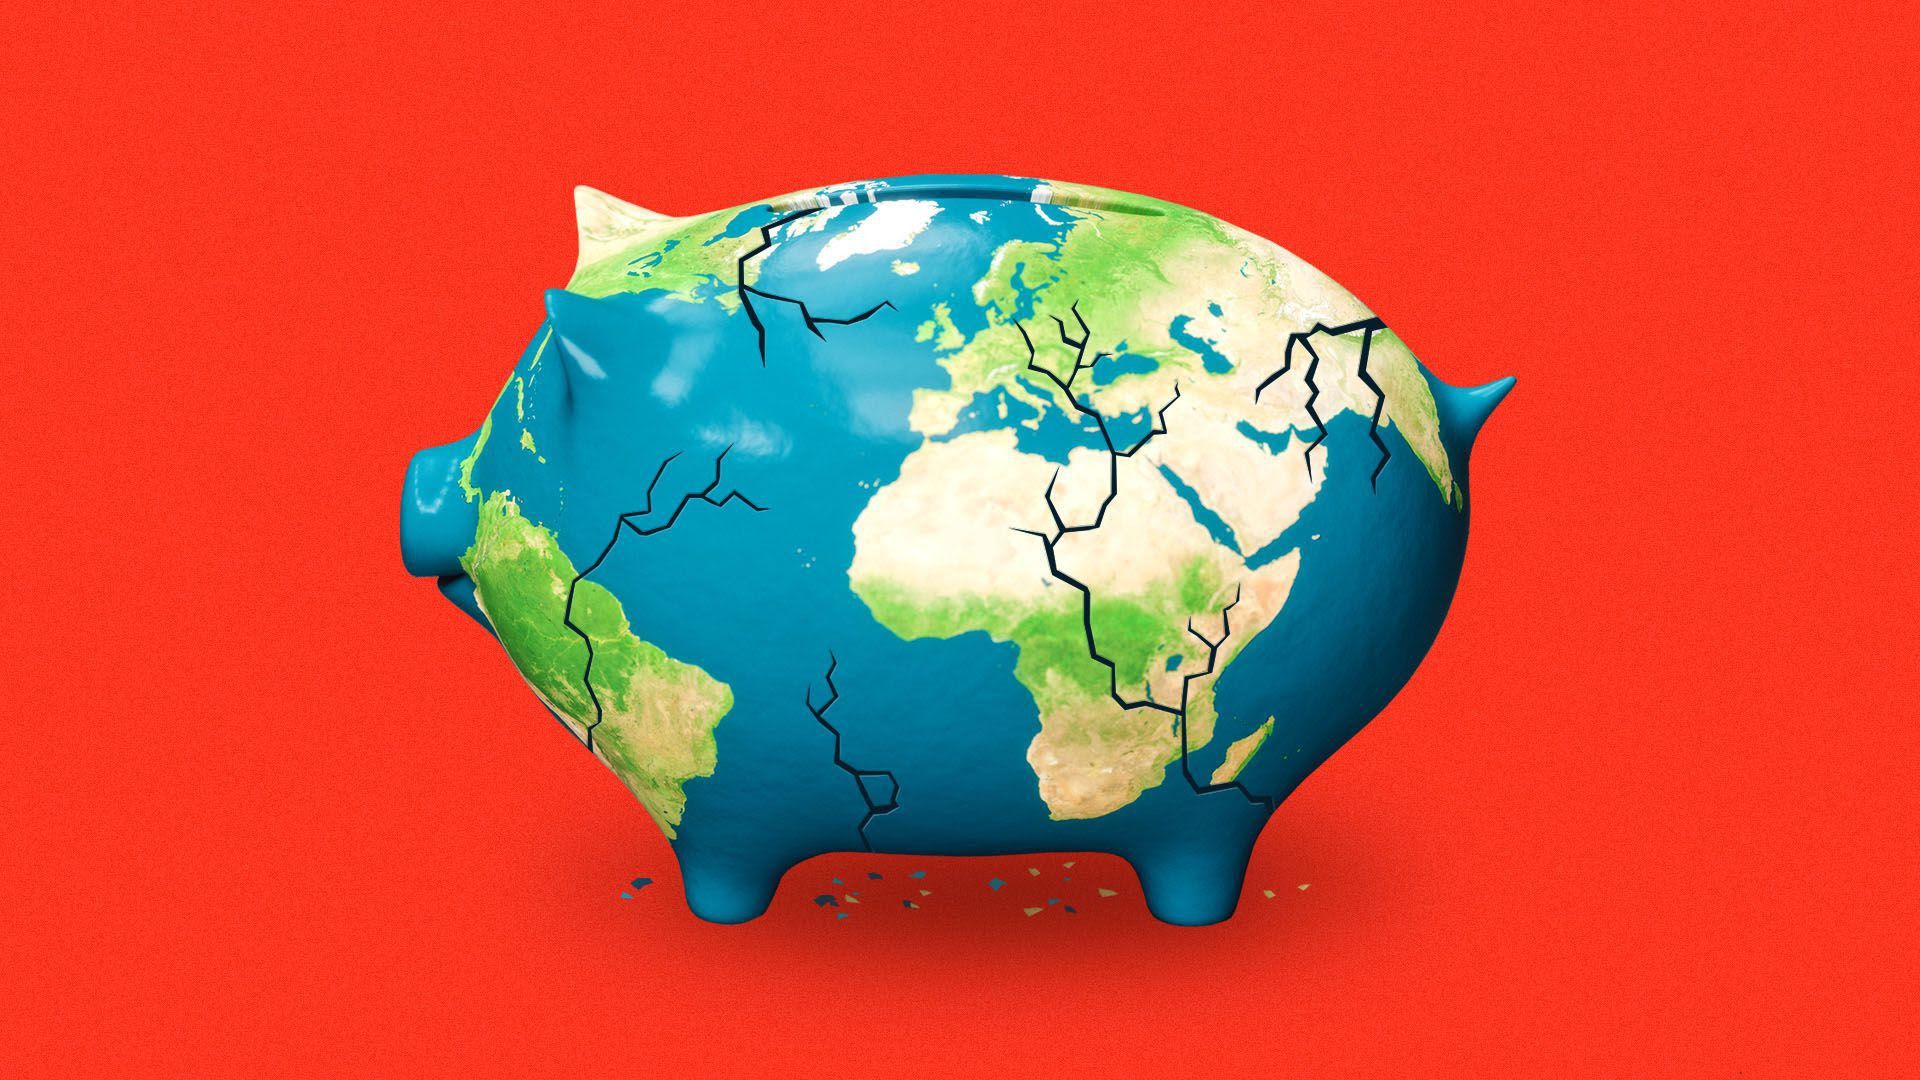 An illustration of the world as a cracked piggy bank.